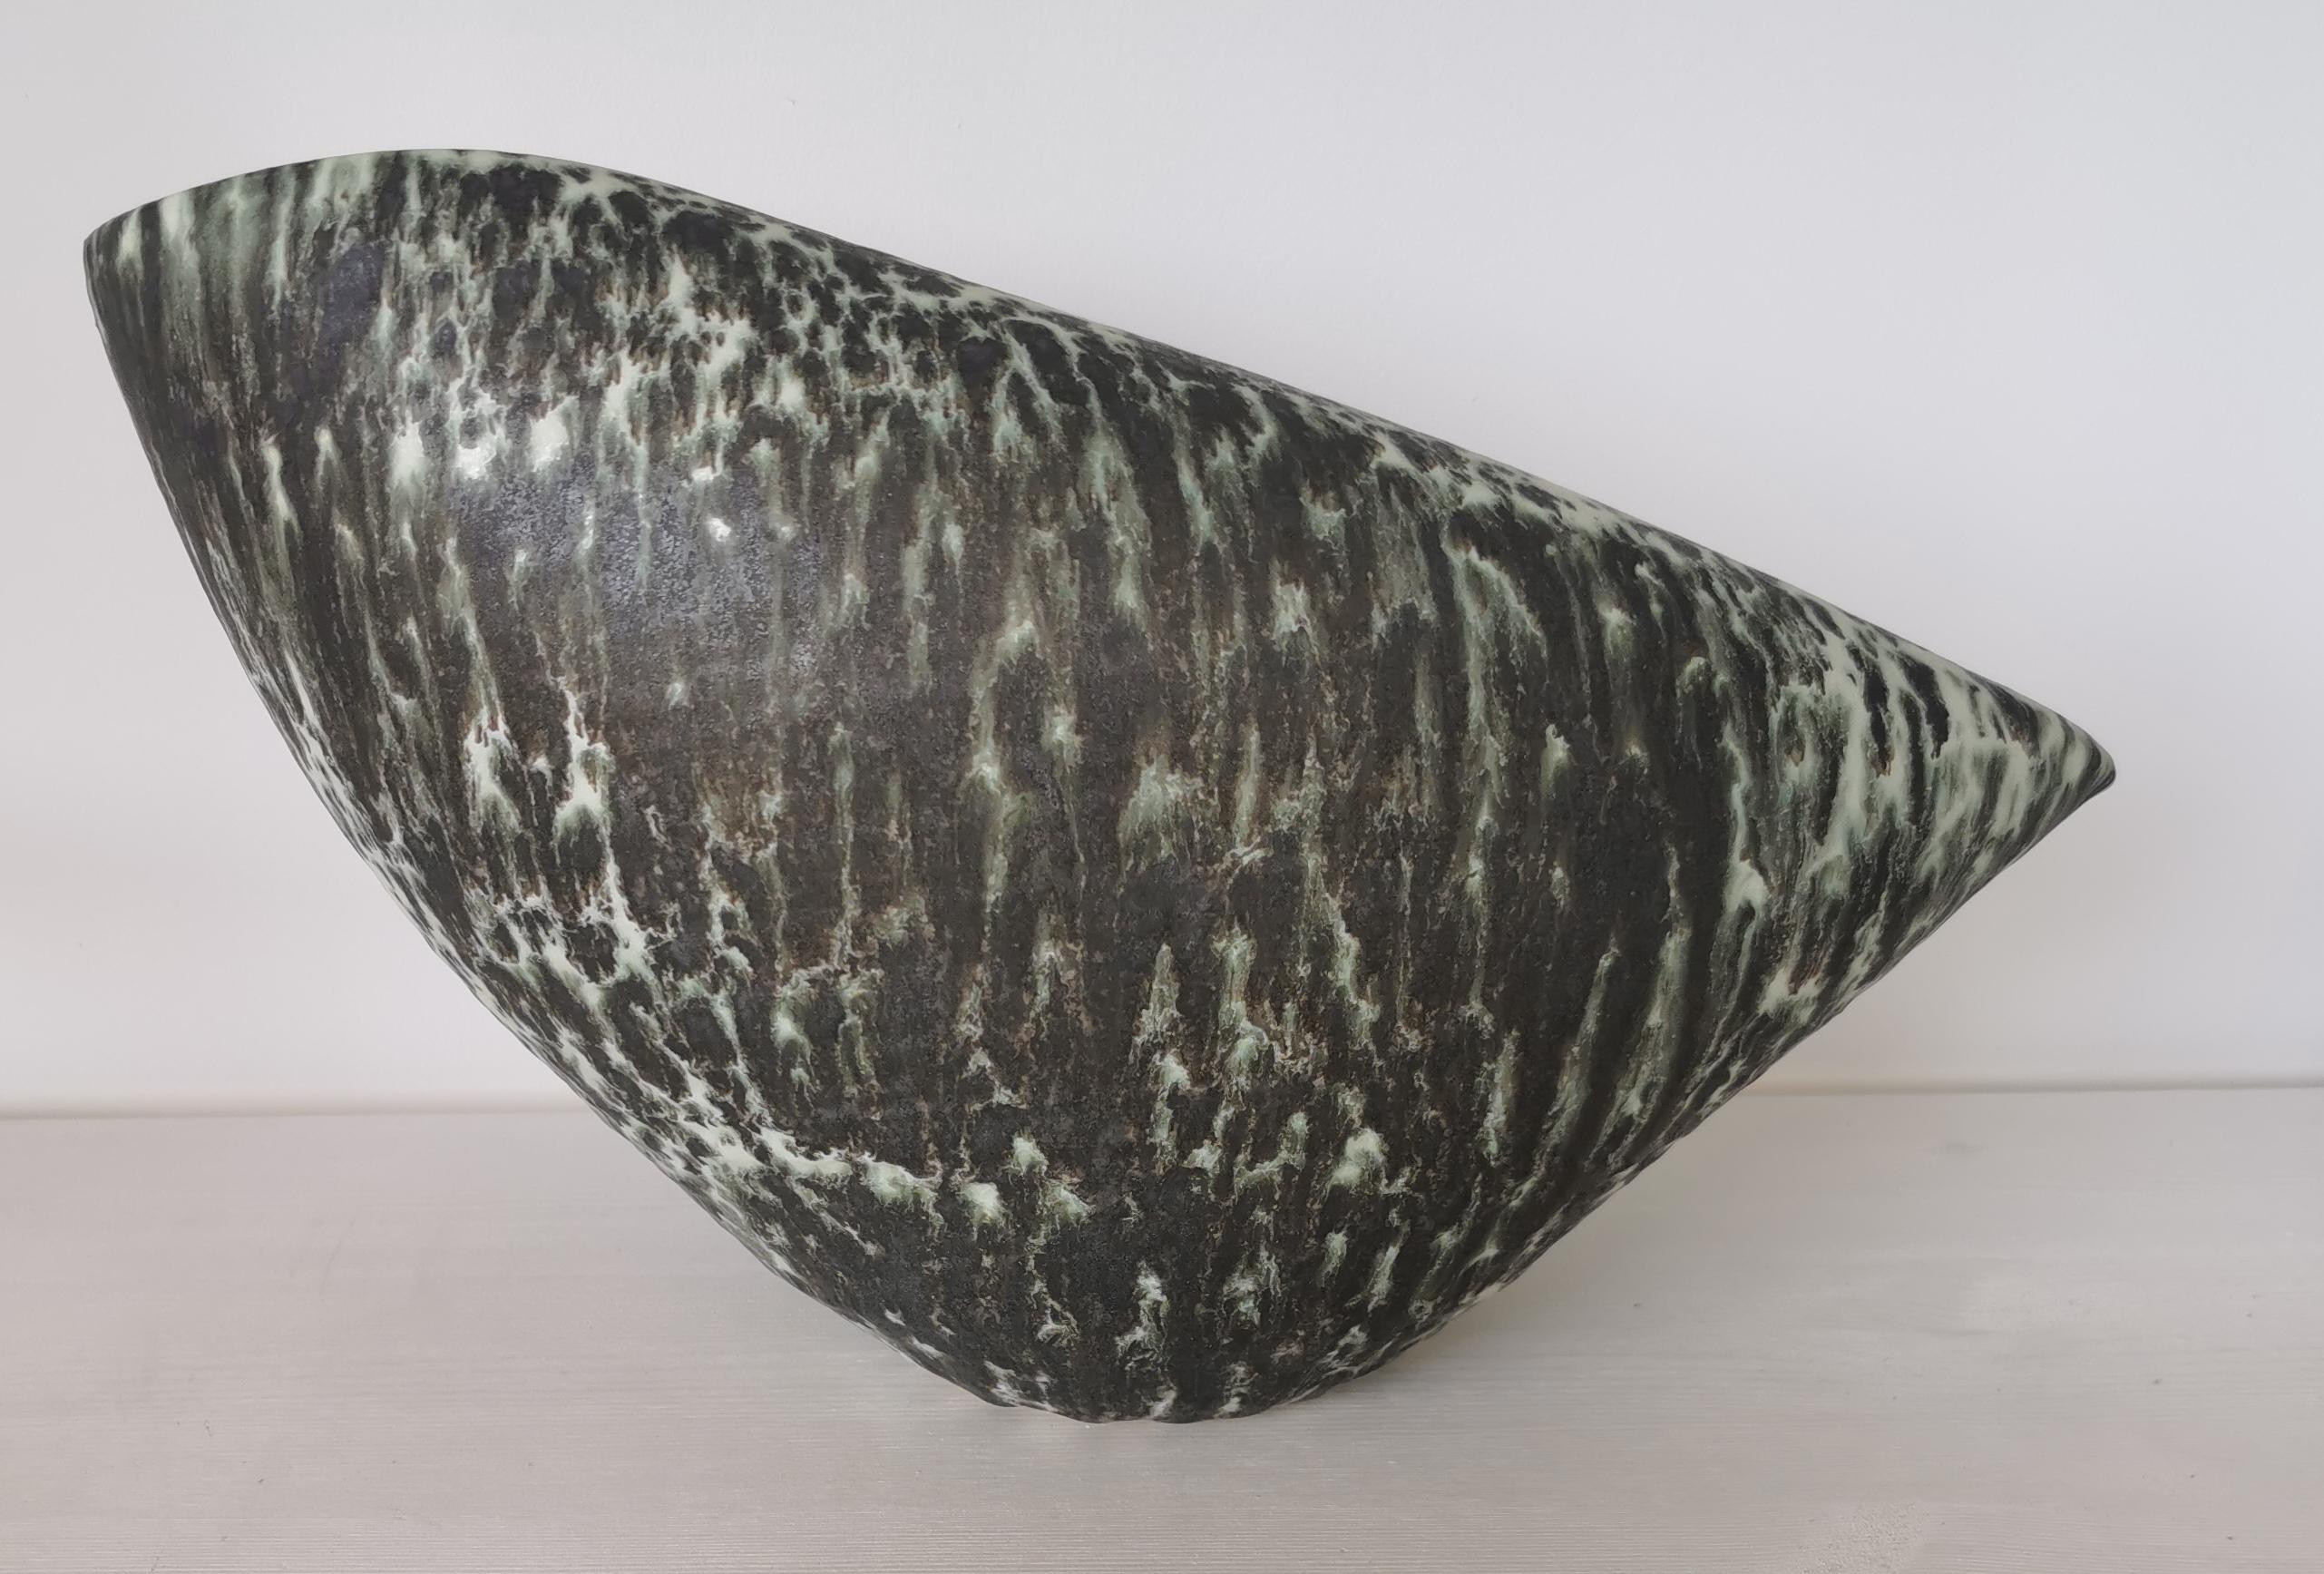 Organic Modern Oval Form with Green and Black Speckled Glaze, Vessel No.98, Ceramic Sculpture For Sale